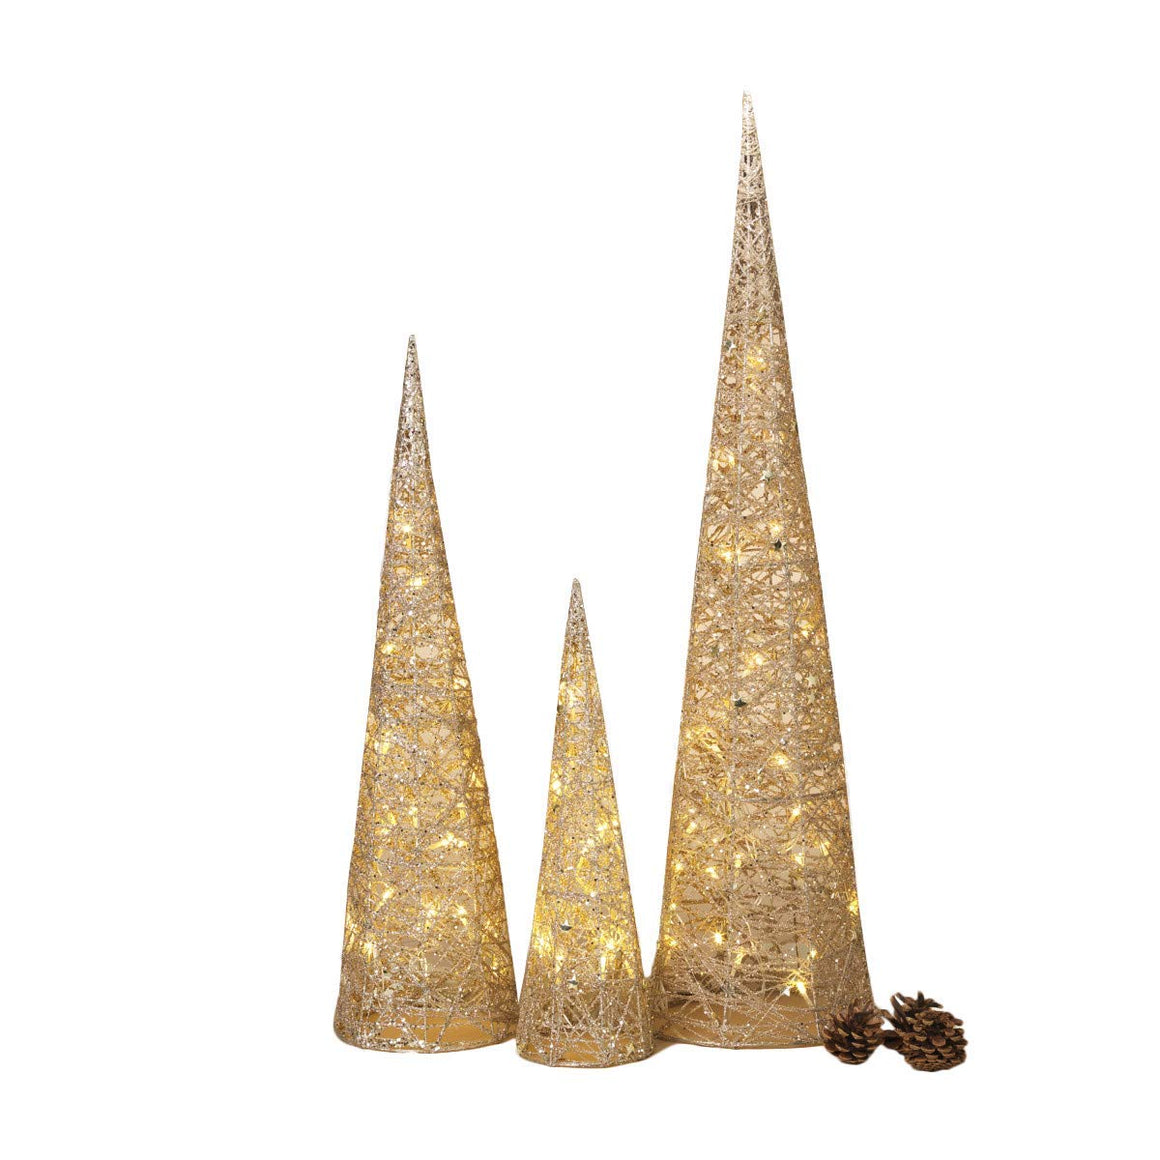 Set of 3 Lighted Gold Glittered Christmas Cone Trees 32 Inches, 24 Inches and 16 Inches High- Battery Operated with Steady or Blinking Functions